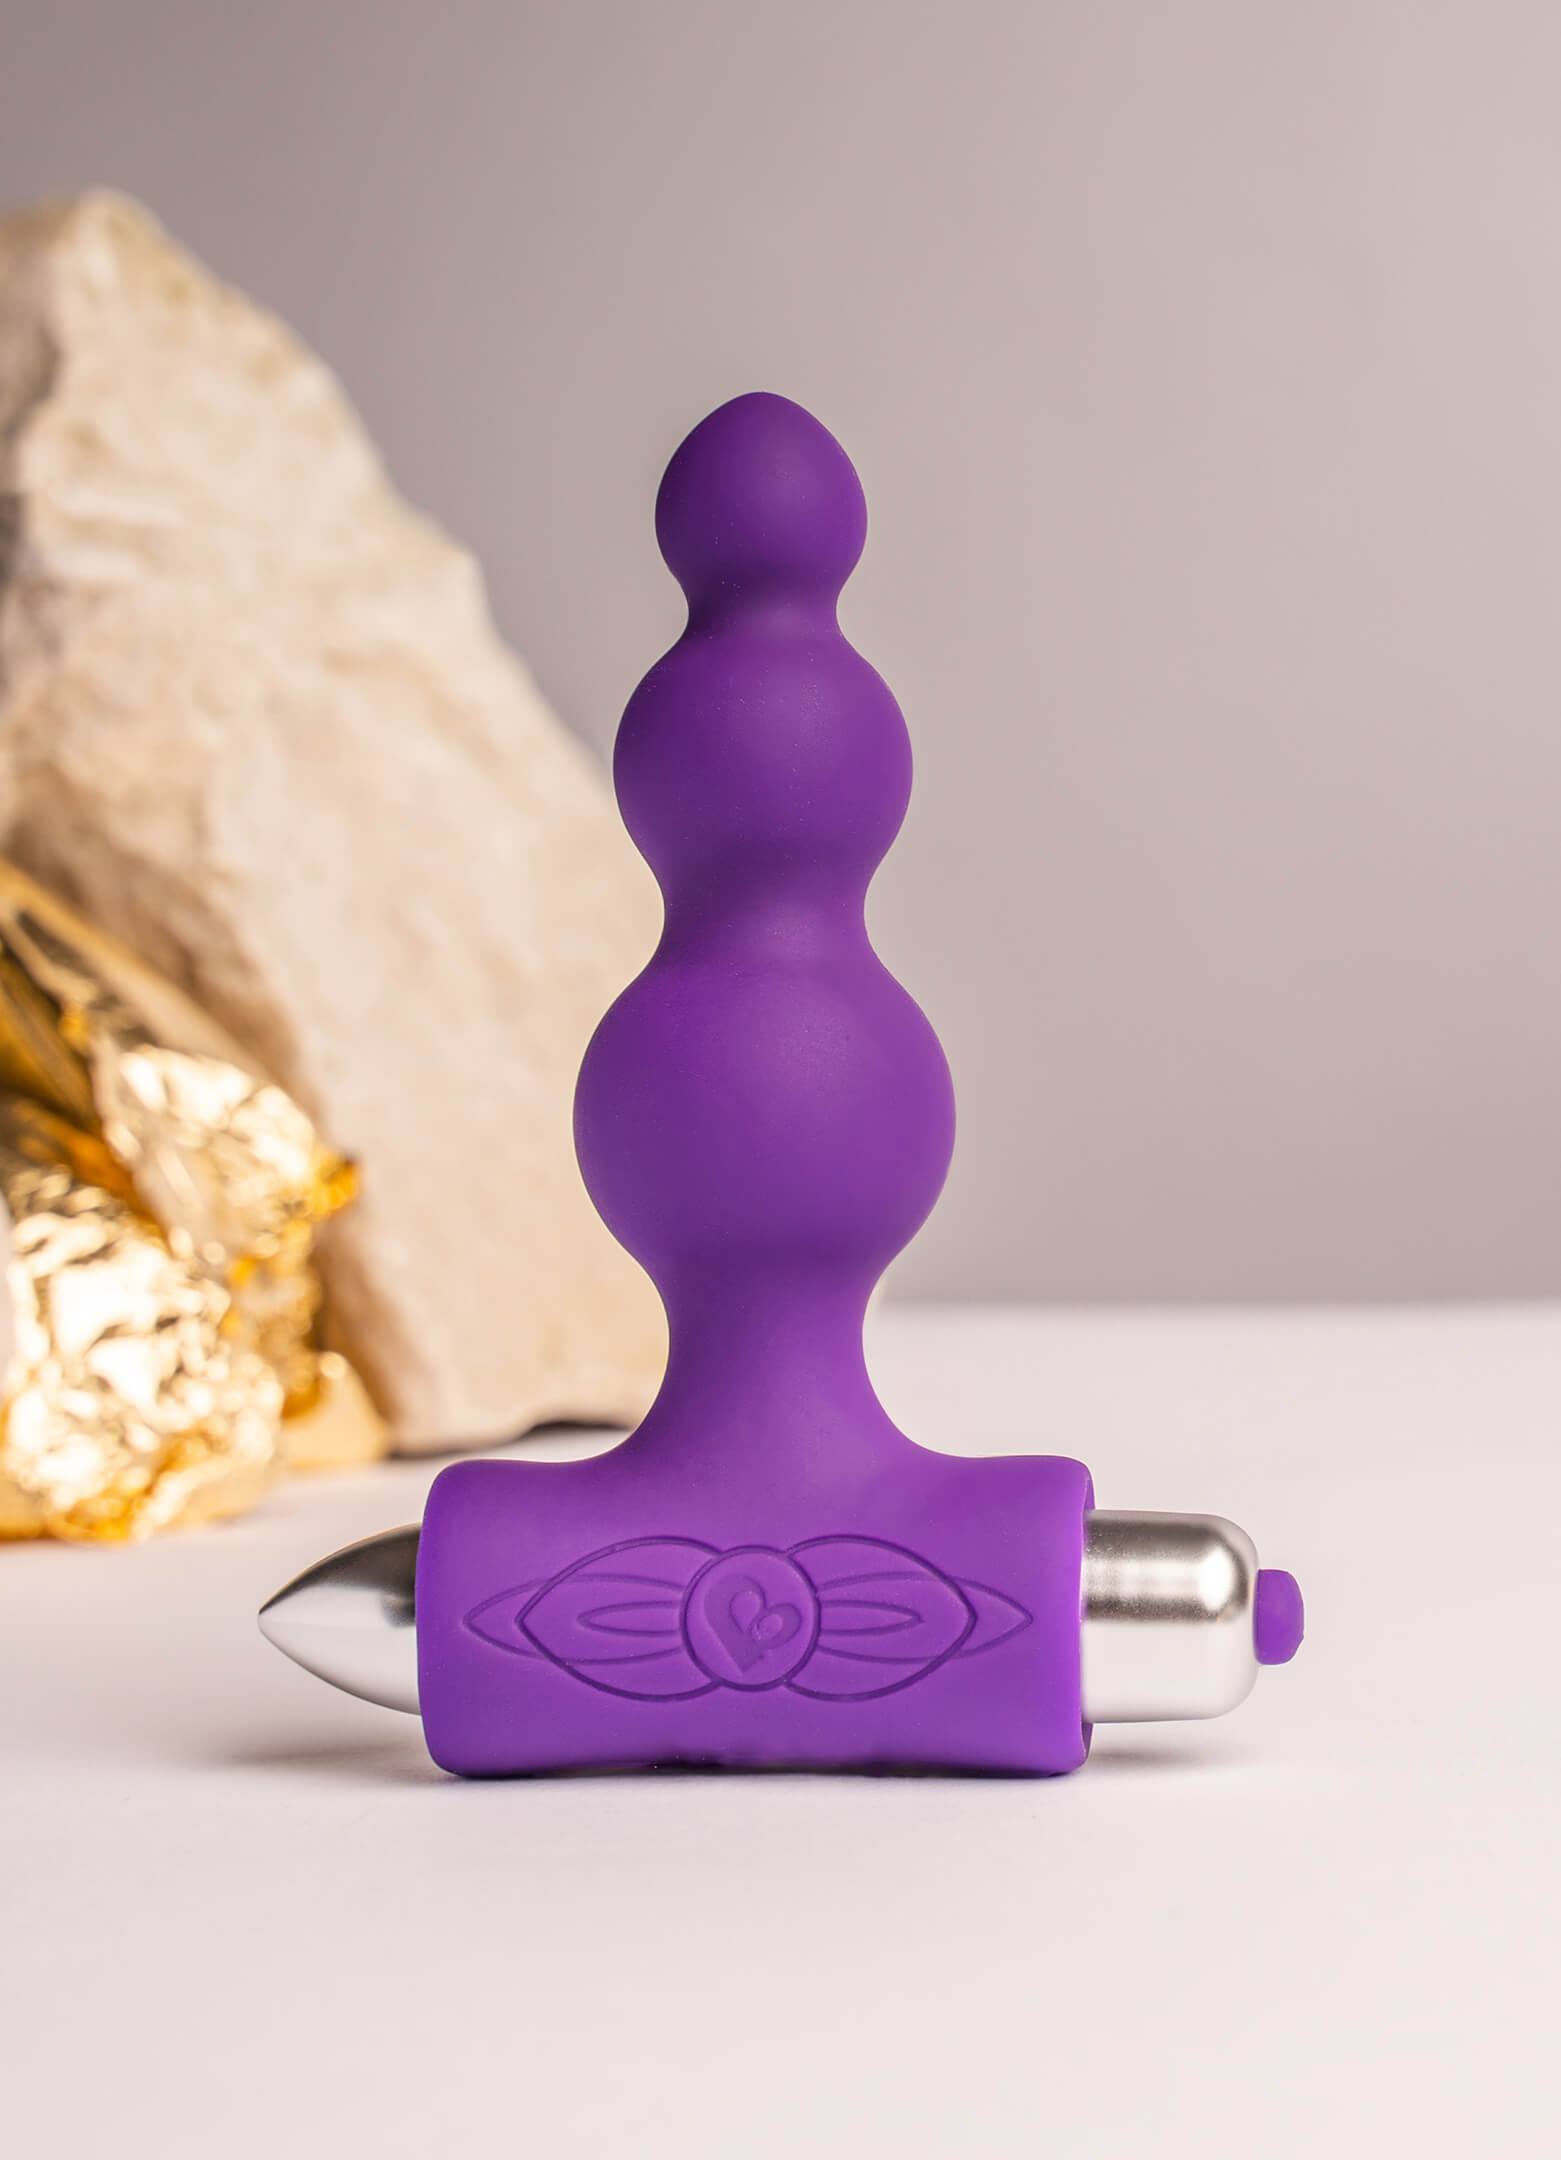 Bubbled silicone butt plug in purple housing a removable bullet vibrator.